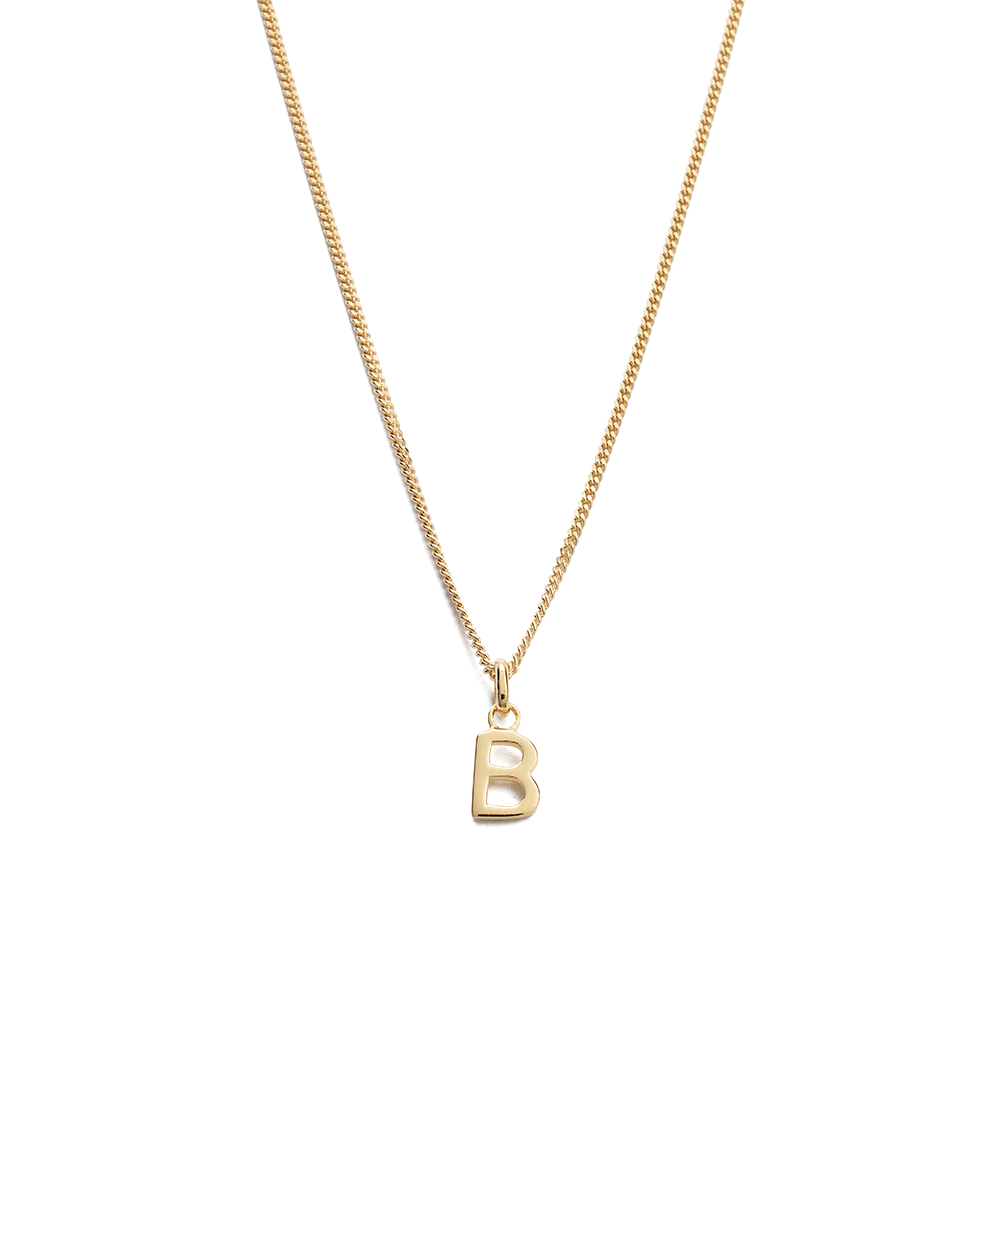 Initial X Necklace Adjustable 41-46cm/16-18' in 18k Gold Vermeil on  Sterling Silver | Jewellery by Monica Vinader